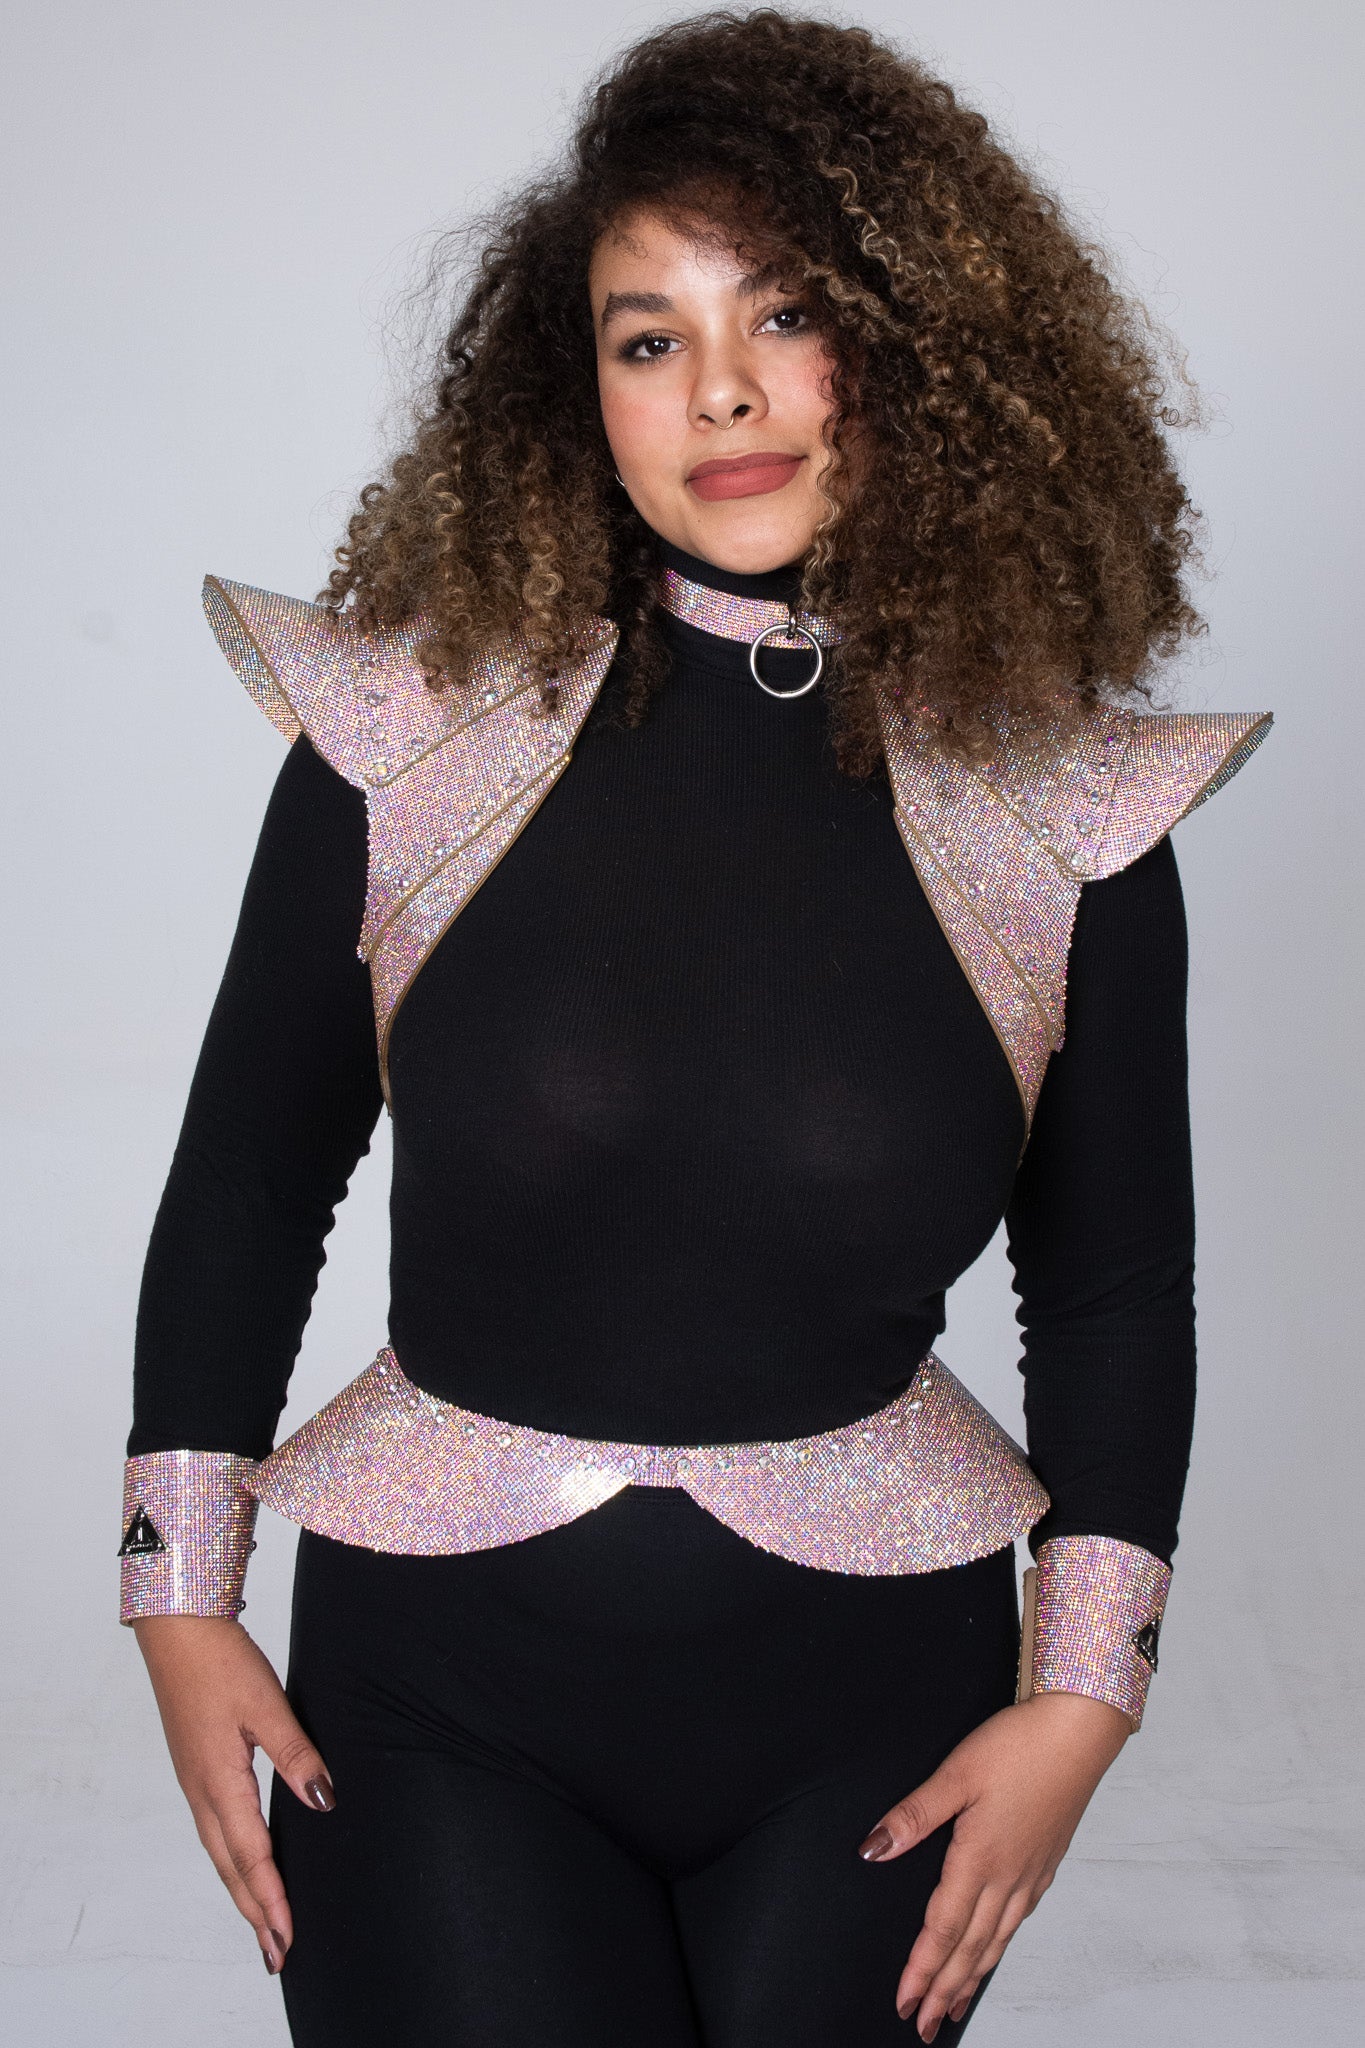 Statement cropped jacket crafted from luxurious multicolor crystal material, ideal for making a bold fashion statement